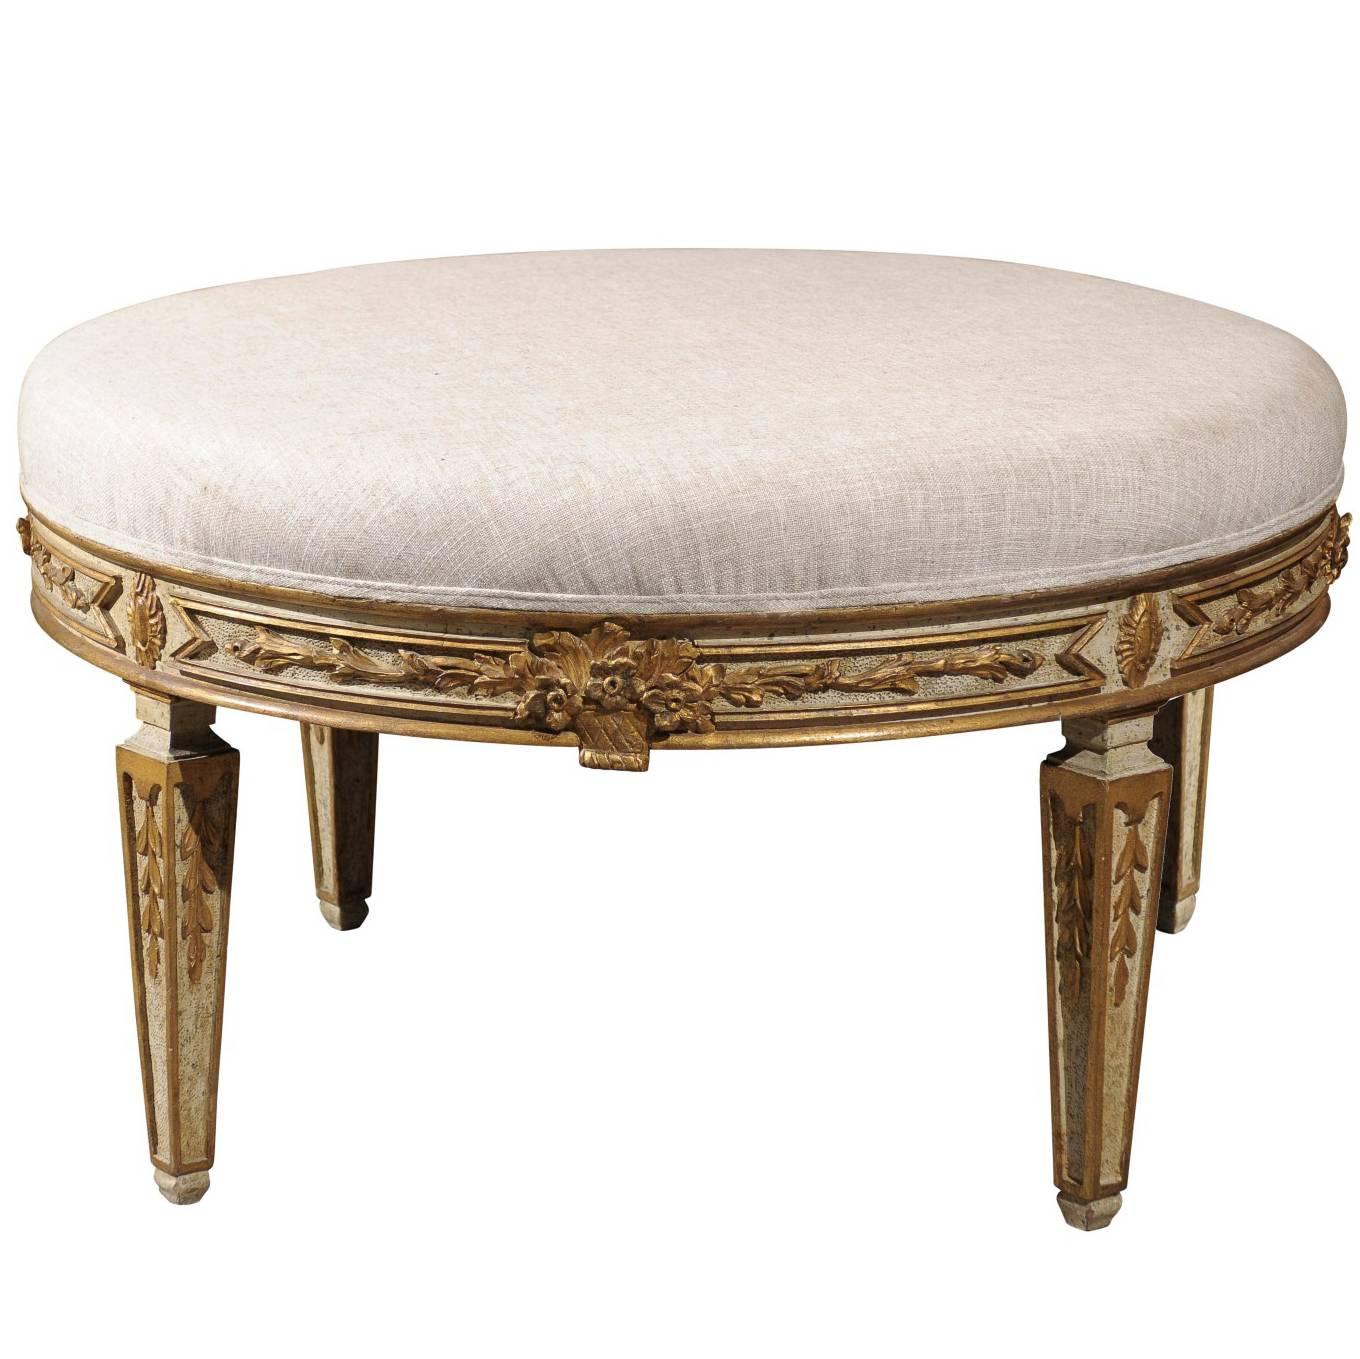 Italian Neoclassical Style Upholstered Round Ottoman with Giltwood Motifs